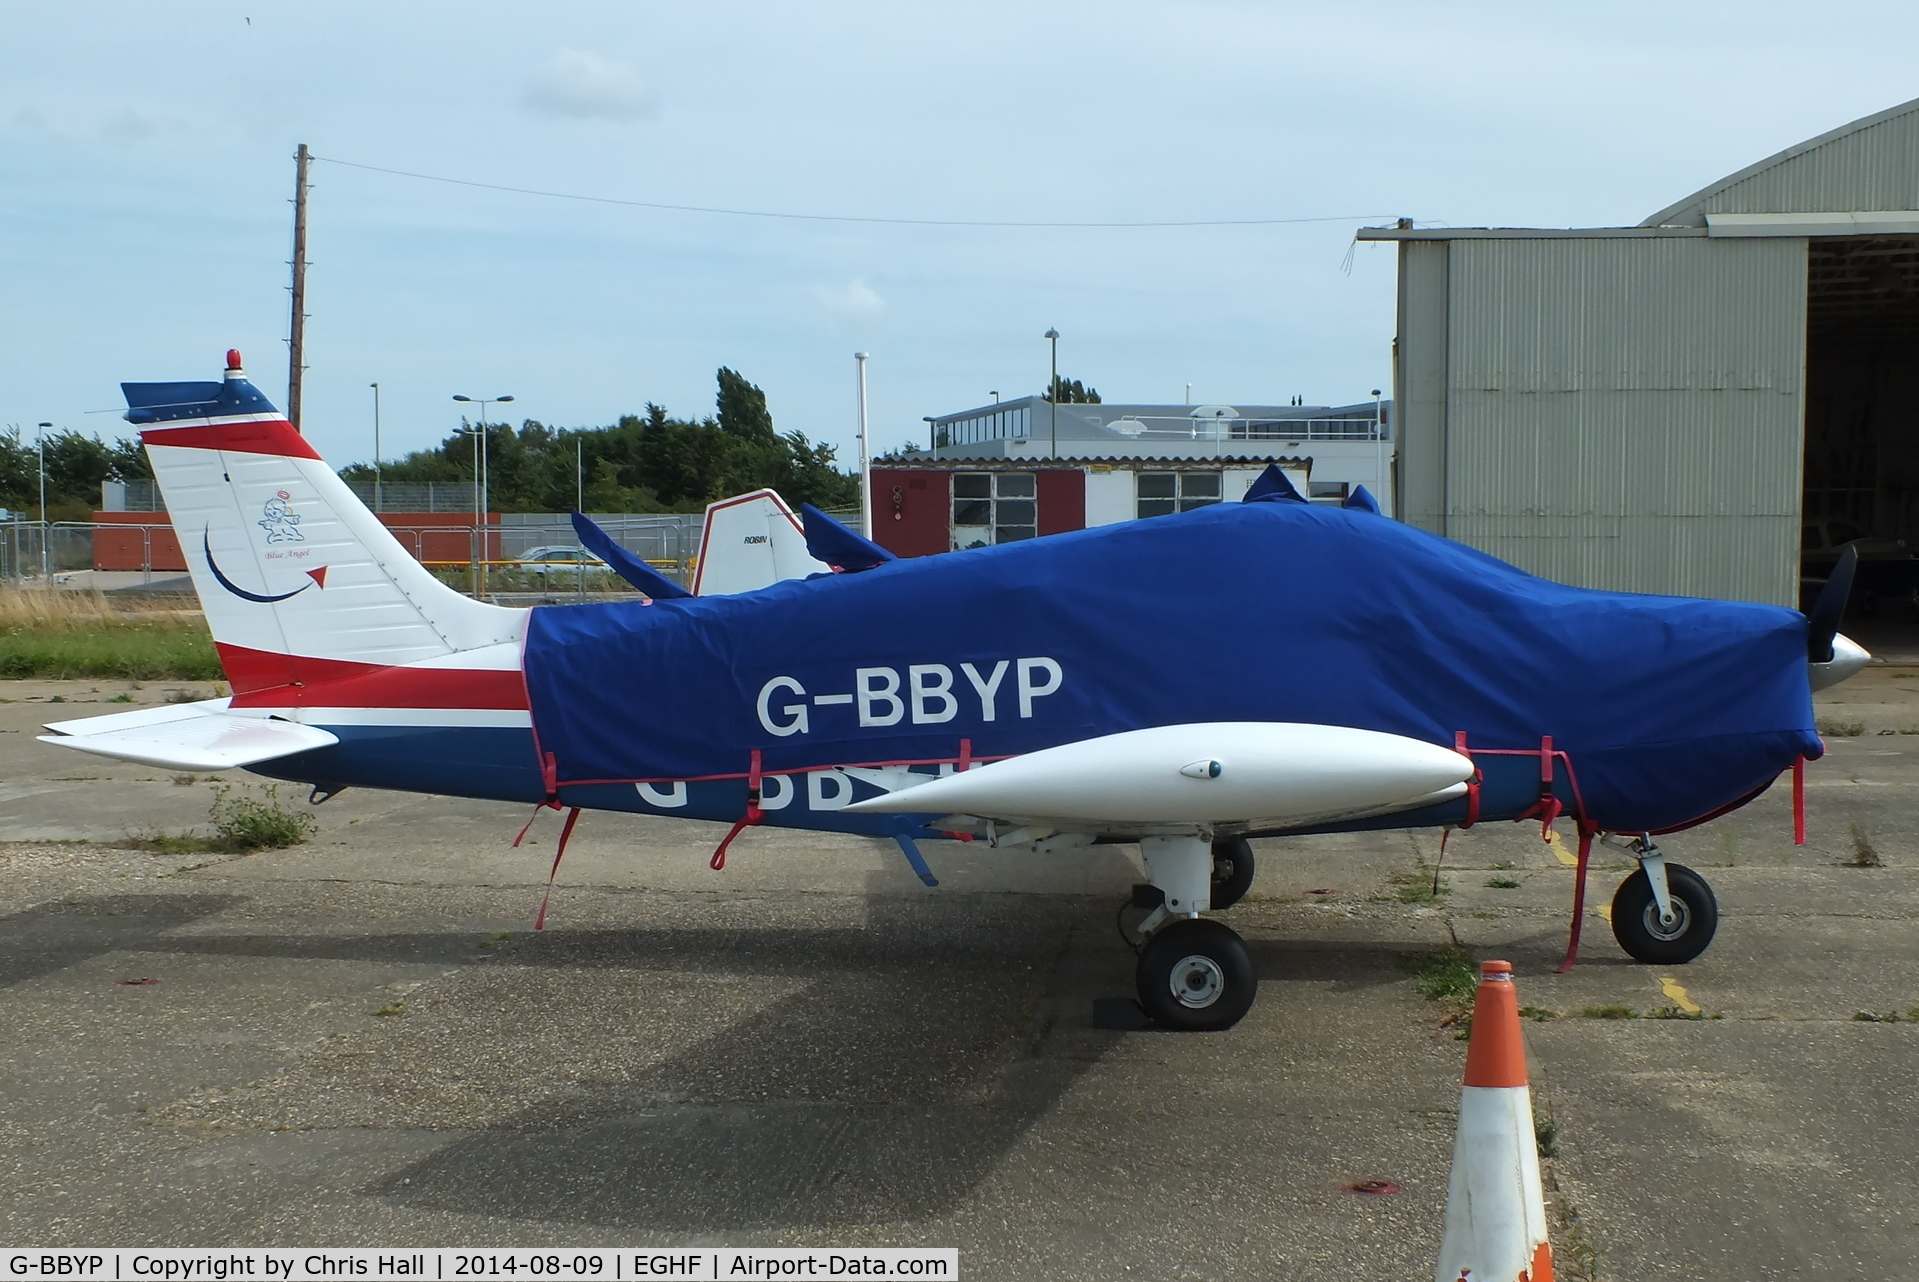 G-BBYP, 1974 Piper PA-28-140 Cherokee Cruiser C/N 28-7425158, at Lee on Solent